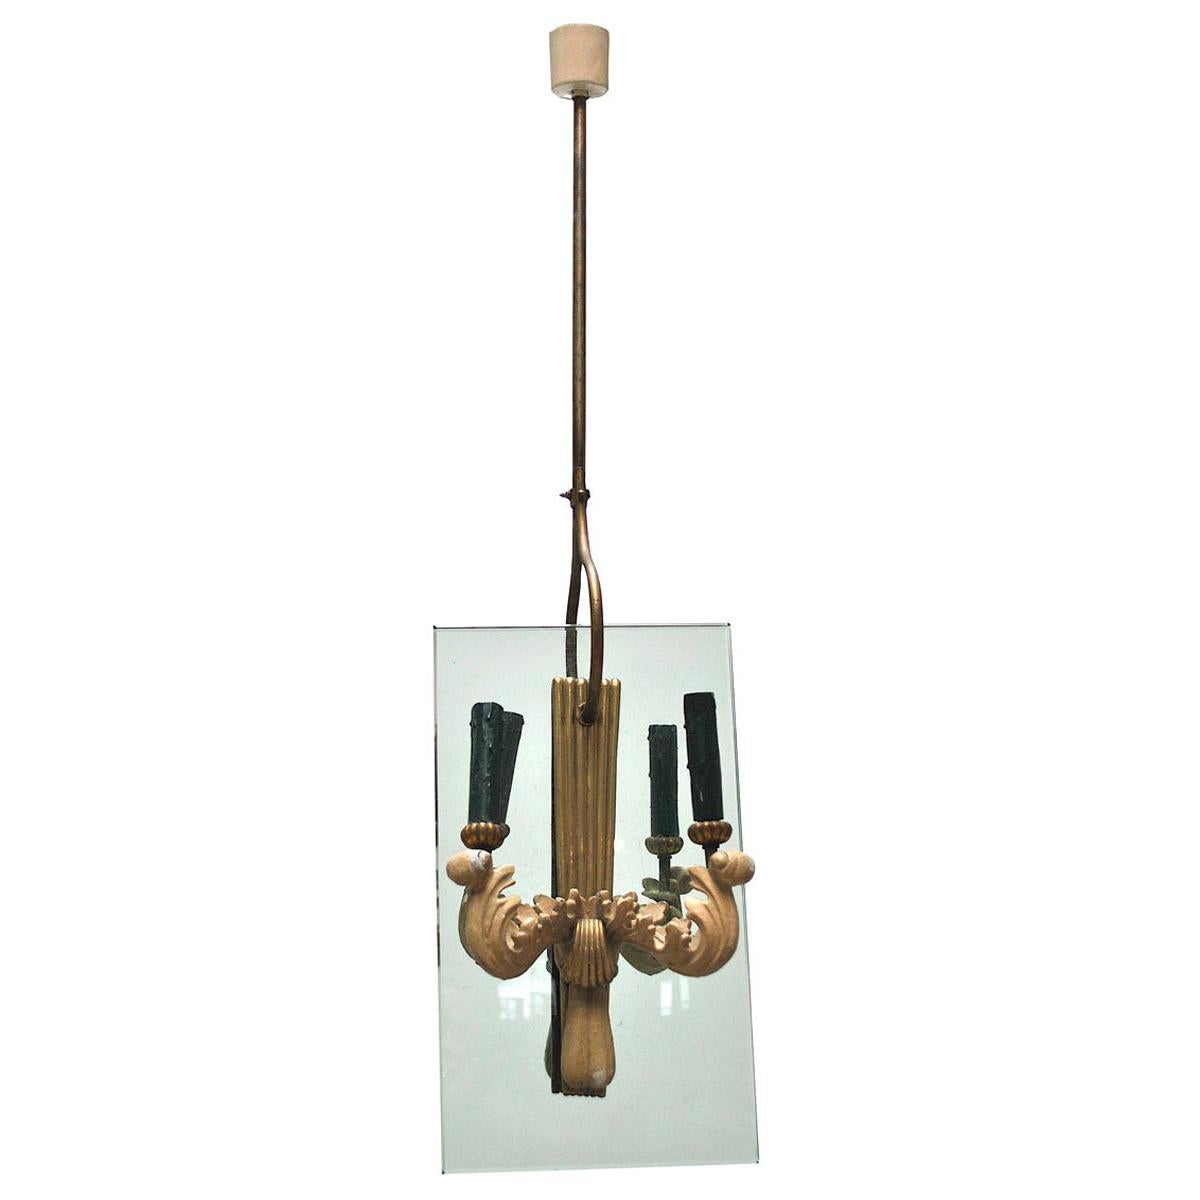 Pietro Chiesa Style Midcentury Chandelier in Brass and Crystal, 1940s For Sale